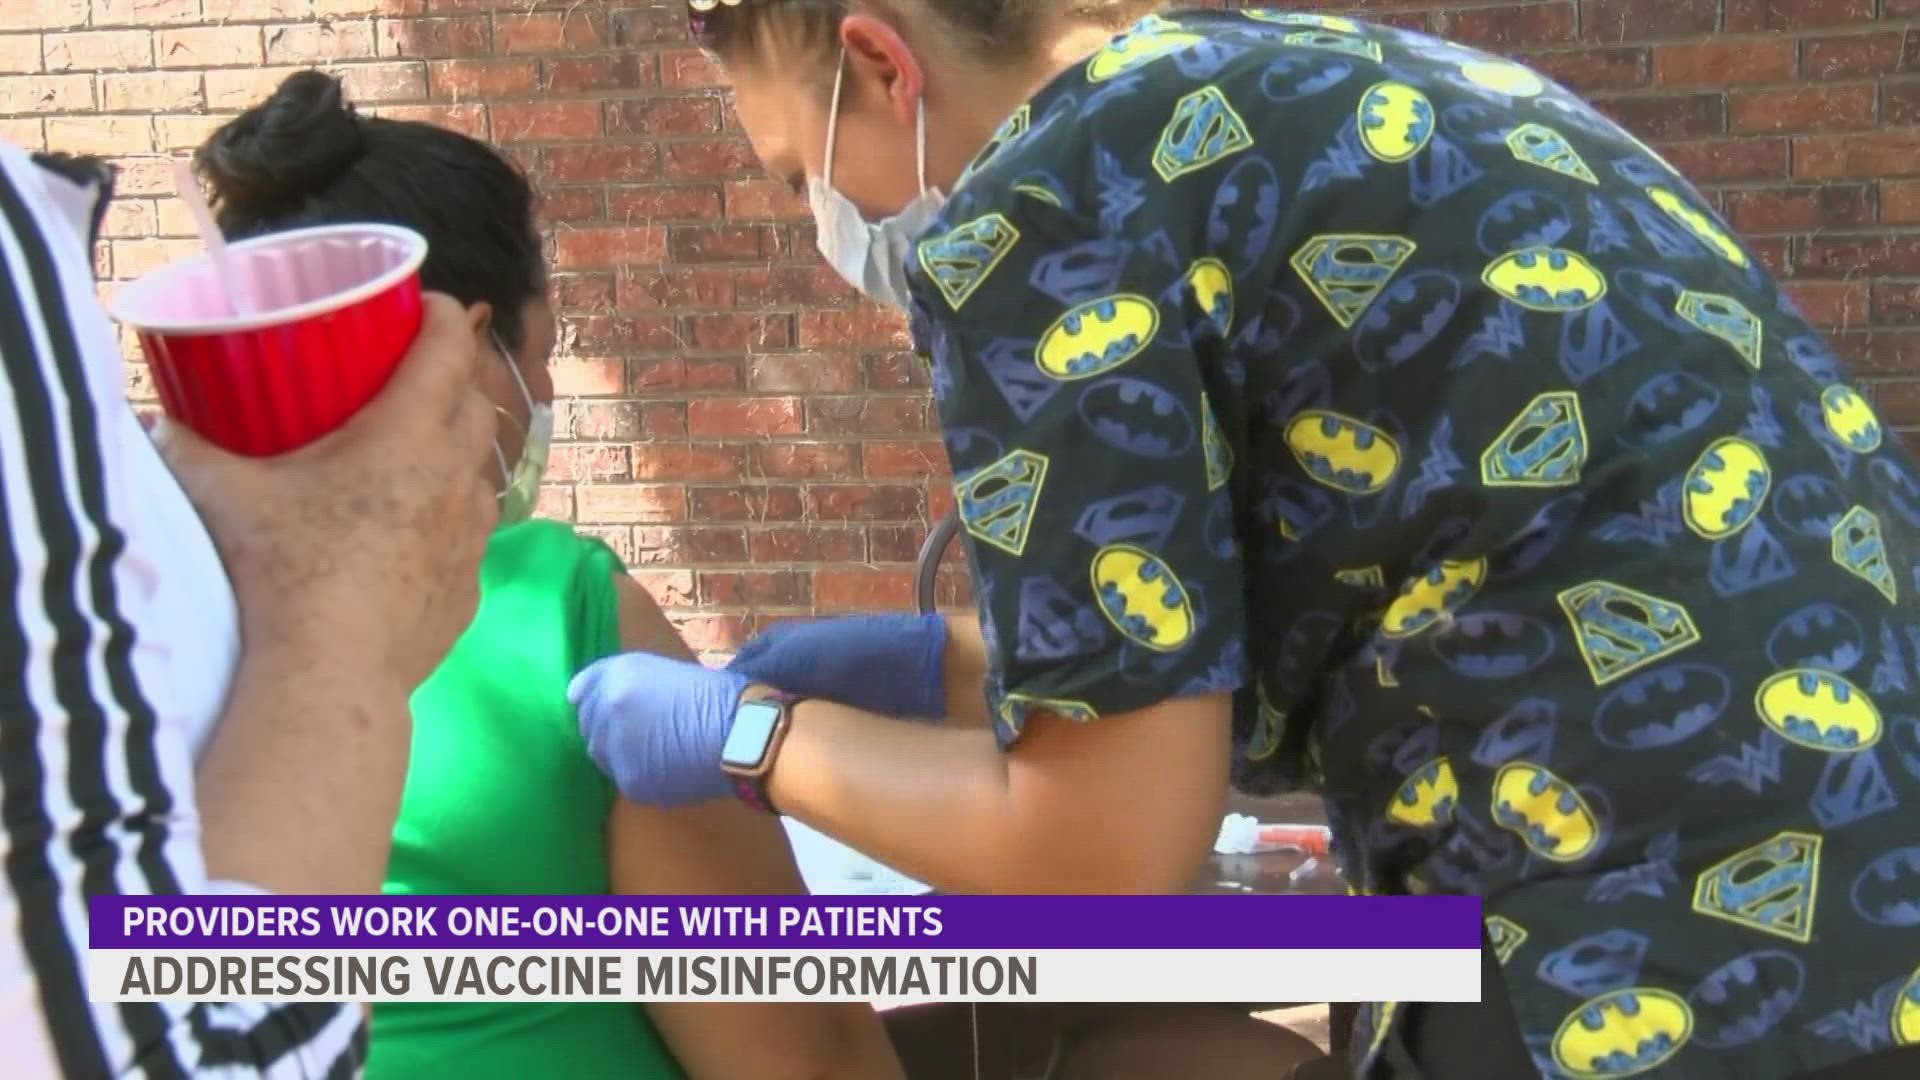 "It's really a societal effort to try to mitigate and respond to this pandemic... It's a lot of people who are affected by each vaccination," Dr. Eric Ash said.